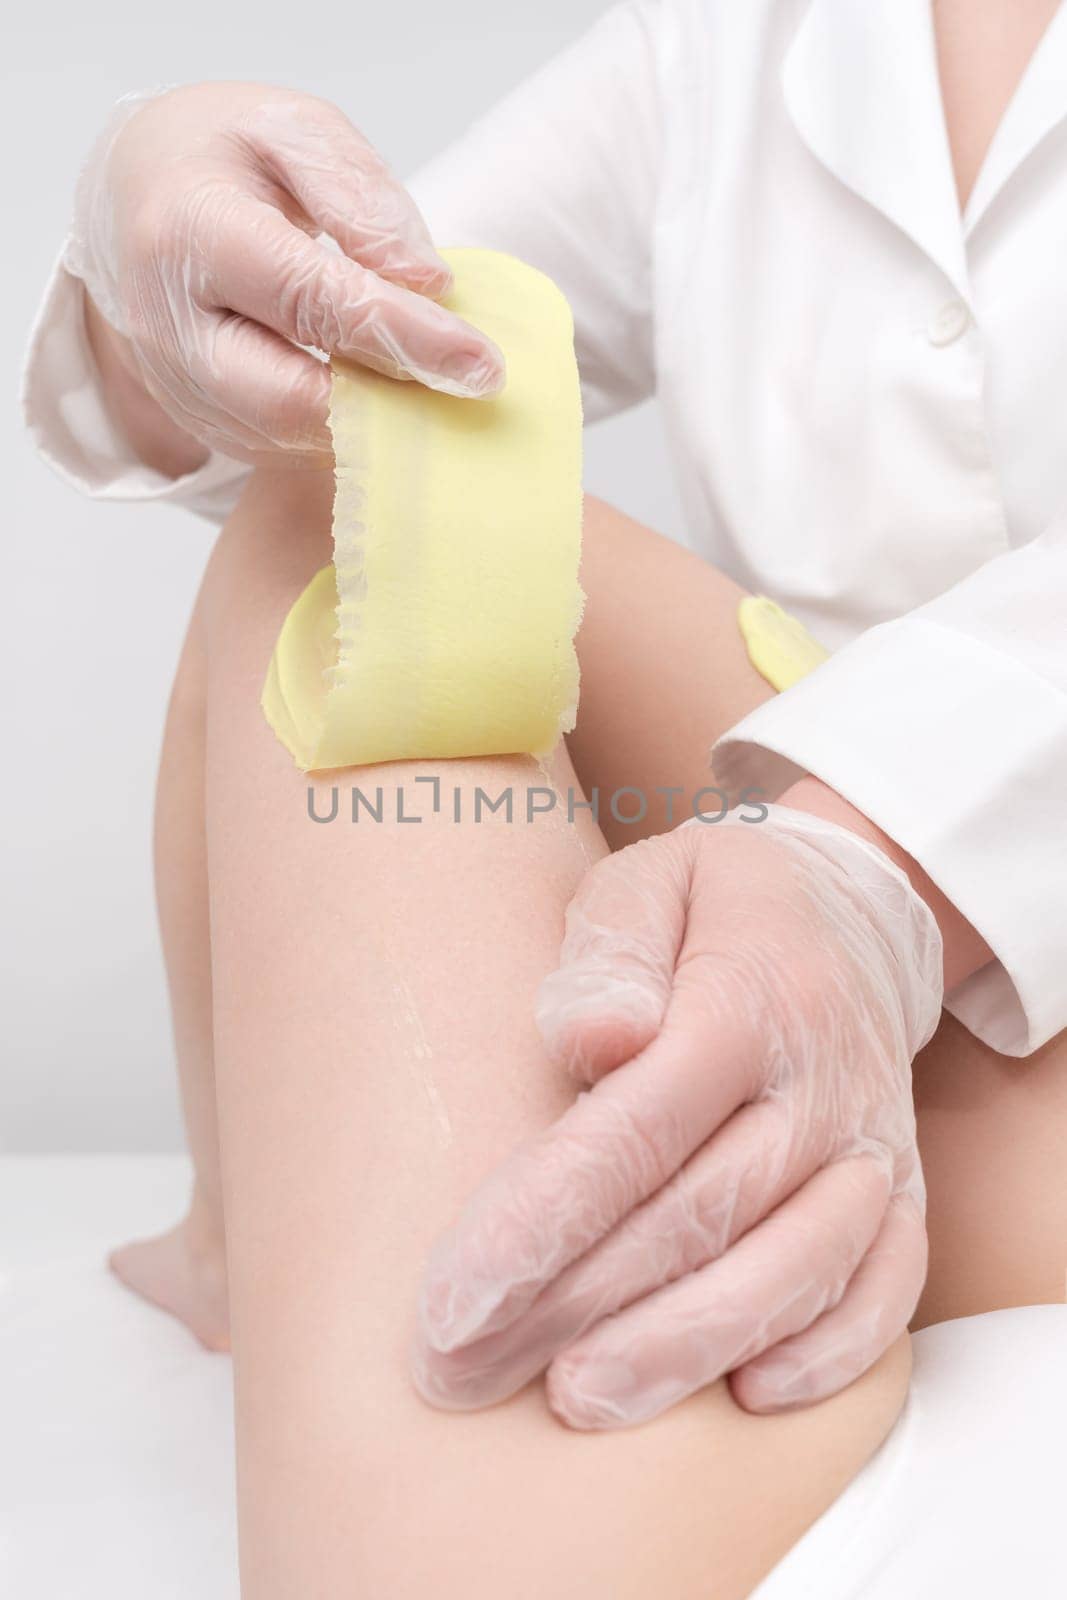 Depilation procedure - cosmetologist hands in gloves removing hair on women leg. Waxing process by Alexander-Piragis